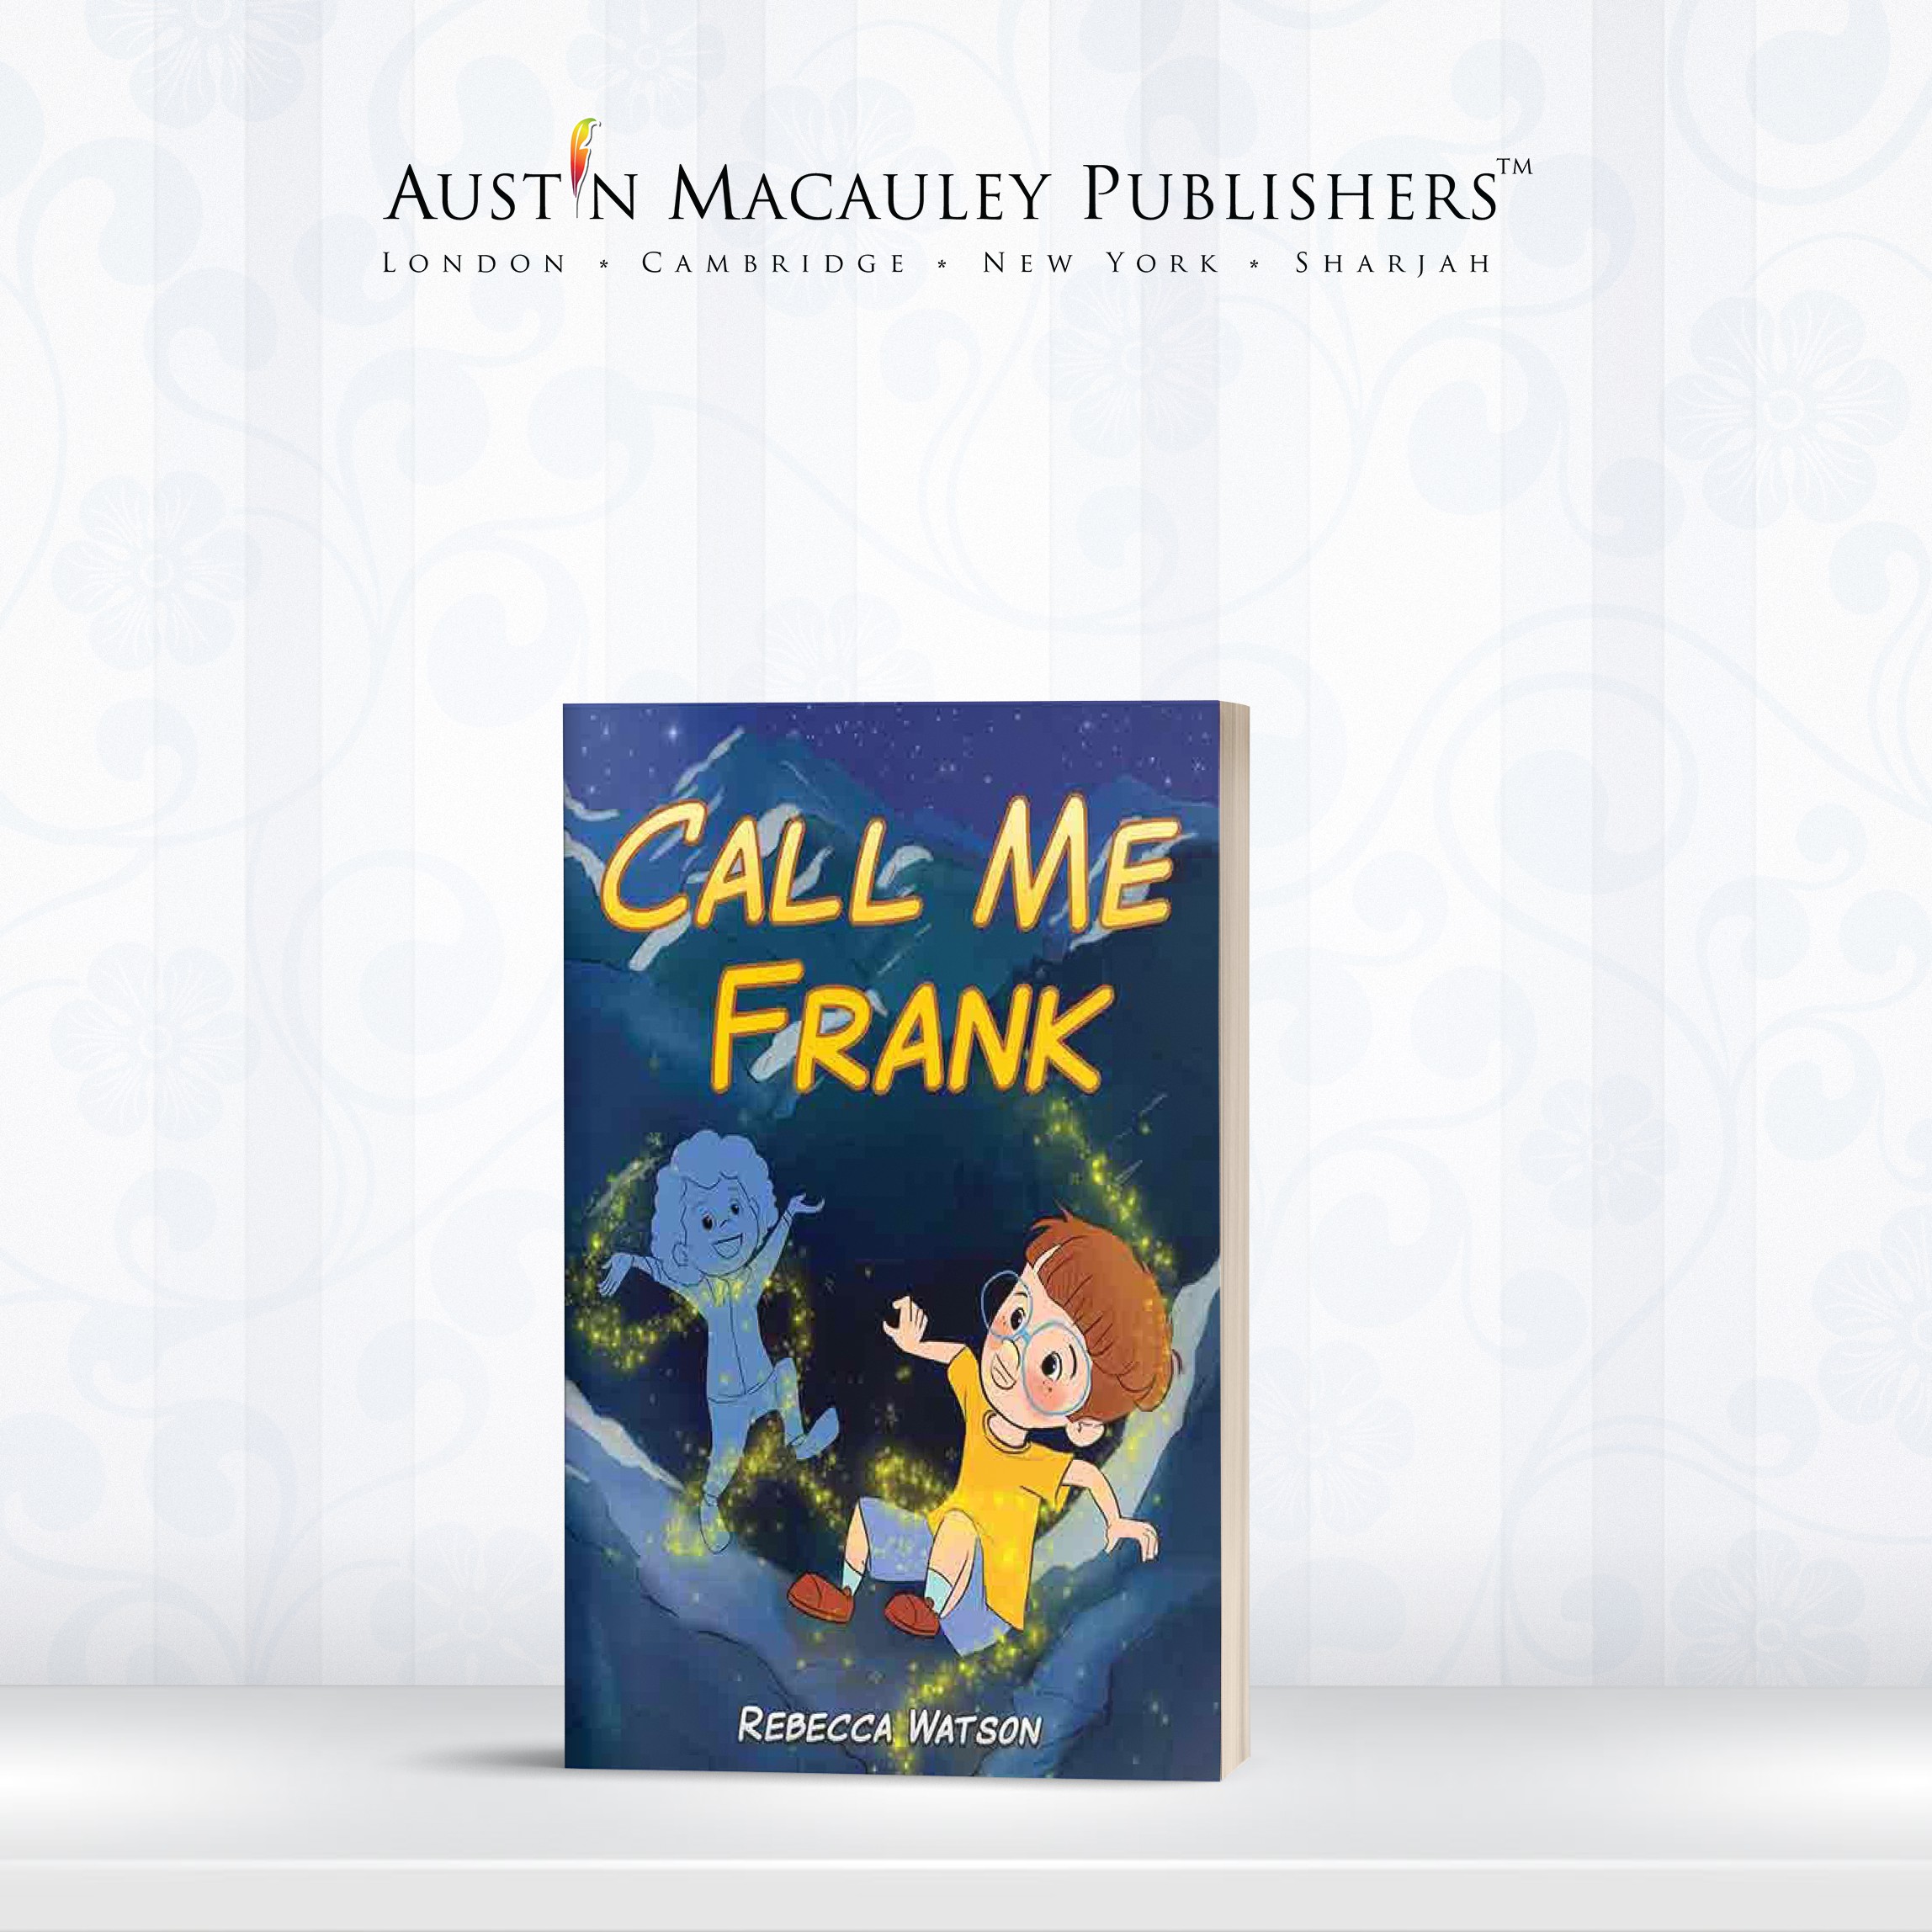 ABC South East Interviewed Rebecca Watson – Author of the Children’s Book, Call Me Frank